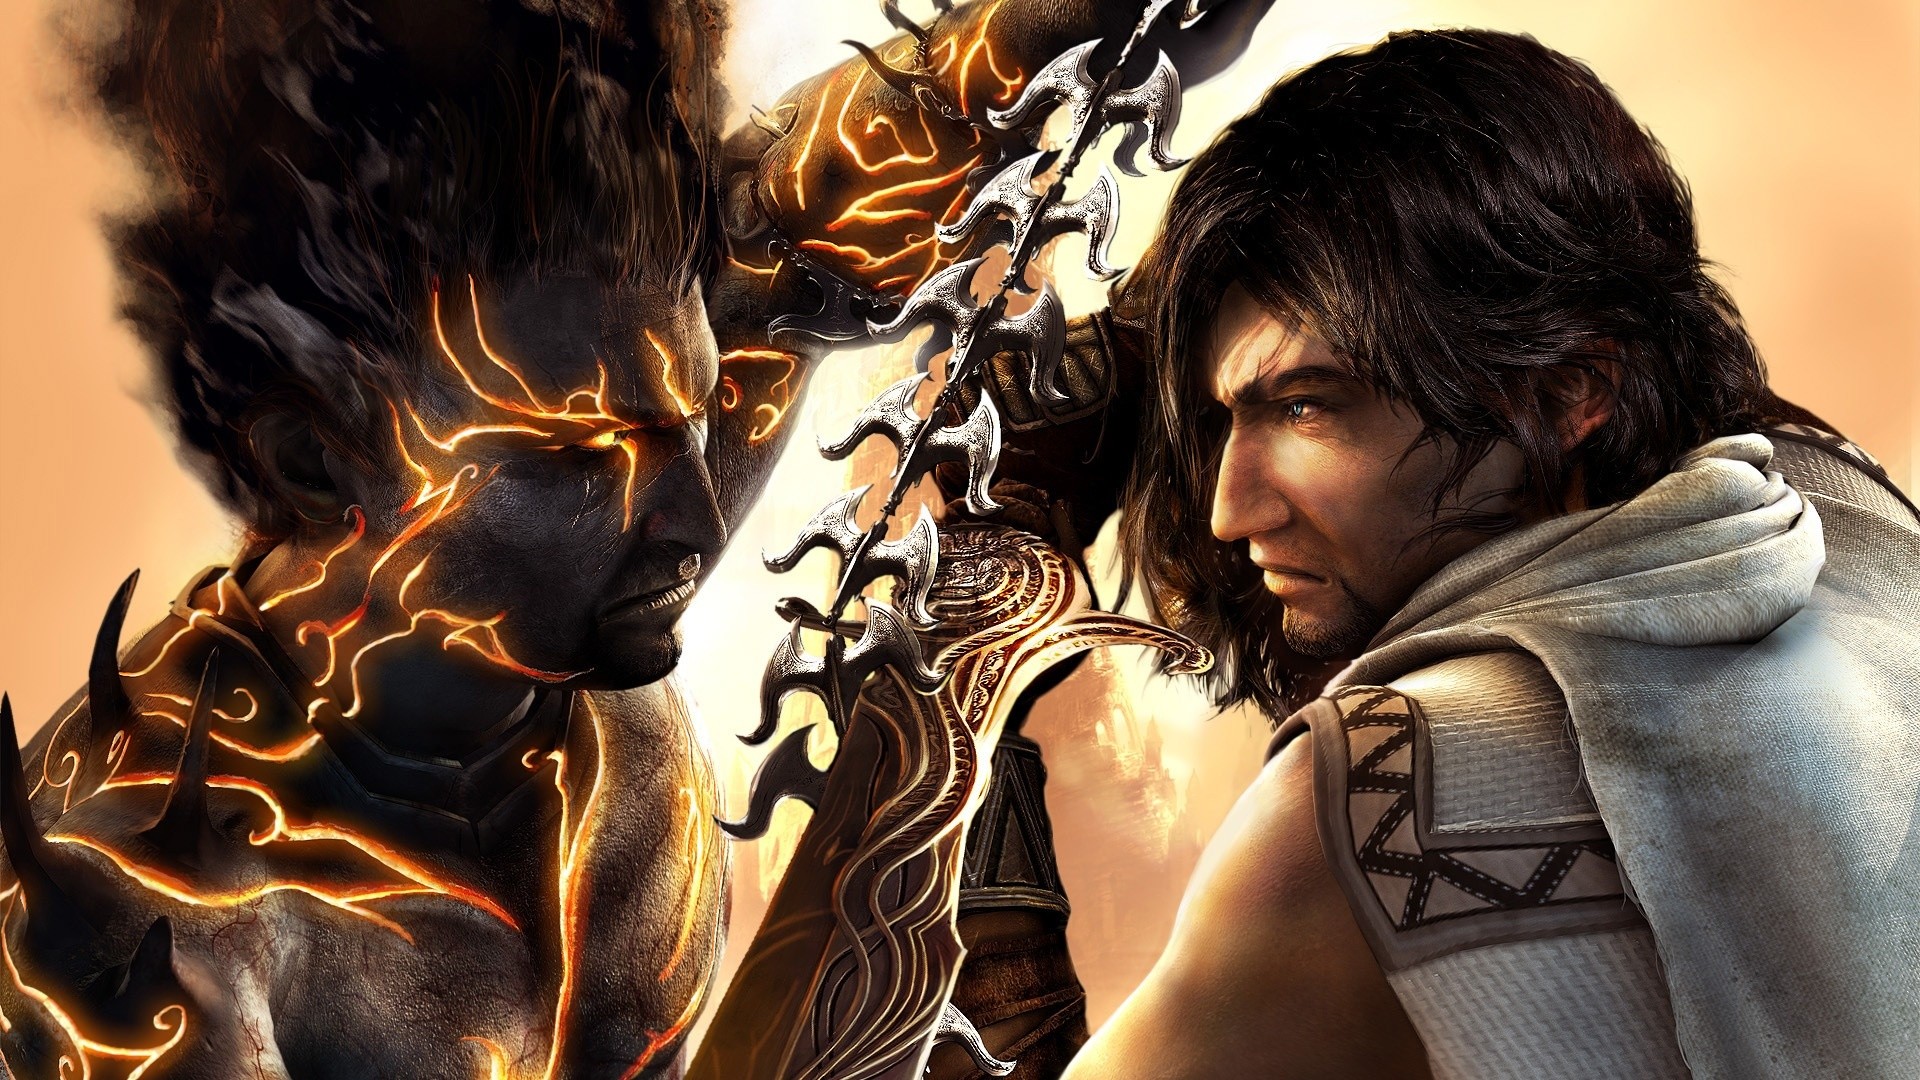 General 1920x1080 video games Prince of Persia: The Two Thrones video game art Ubisoft fantasy art fantasy men video game men